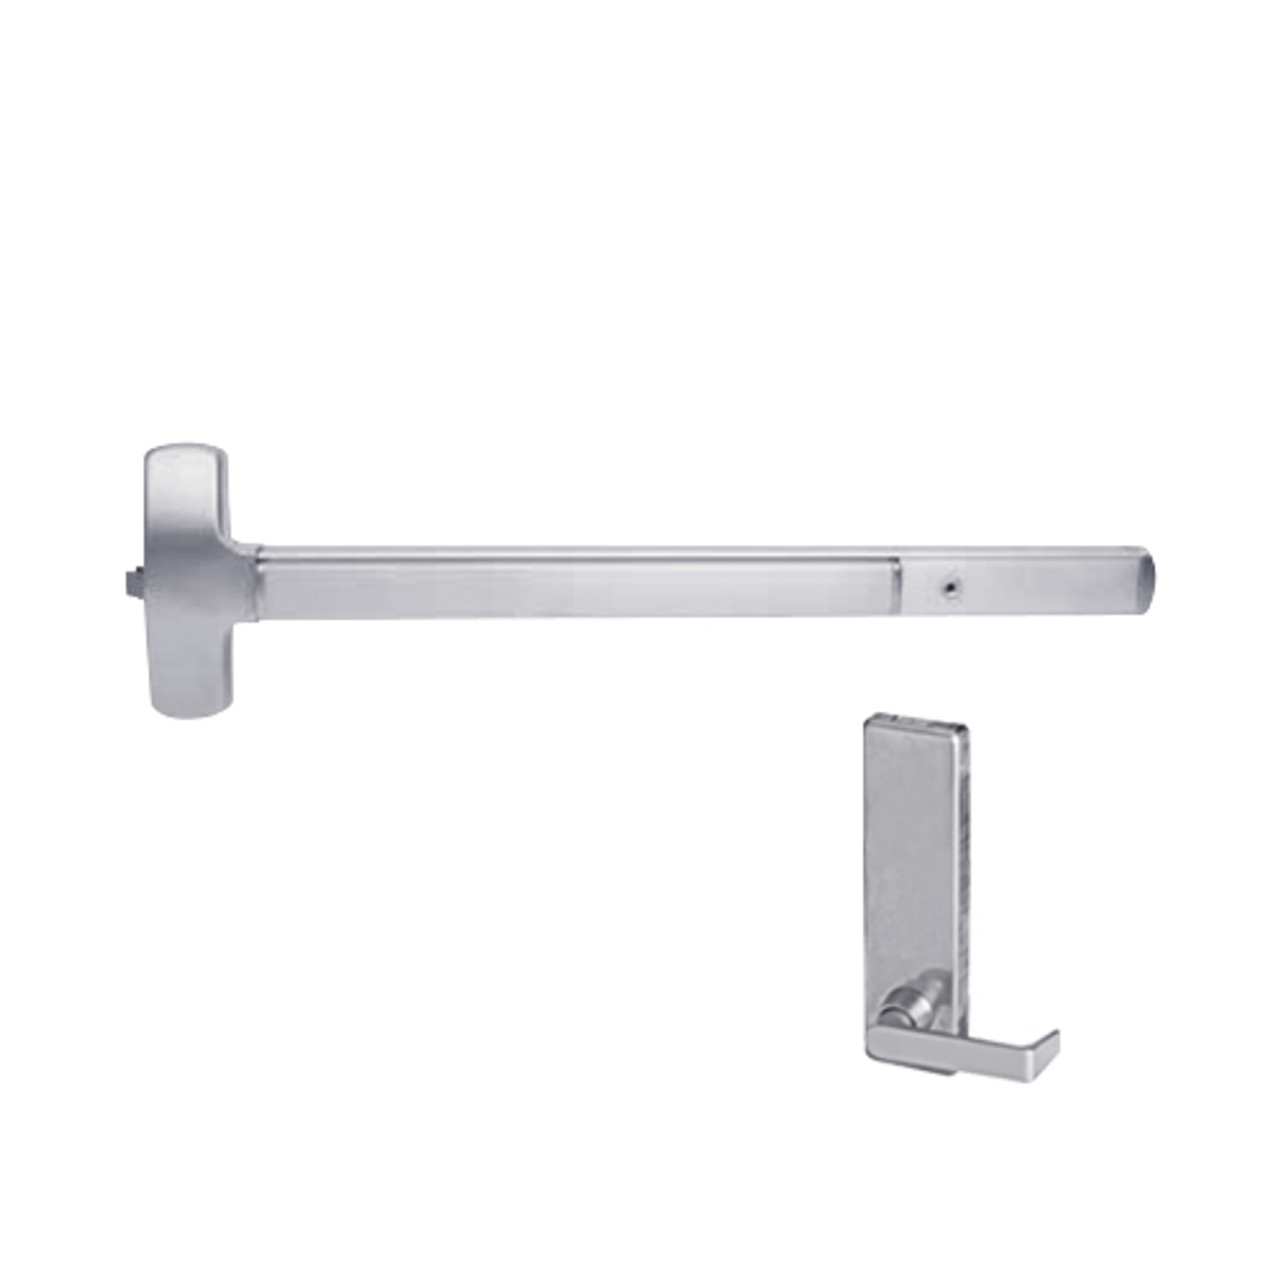 25-R-L-BE-DANE-US32-4-LHR Falcon Exit Device in Polished Stainless Steel